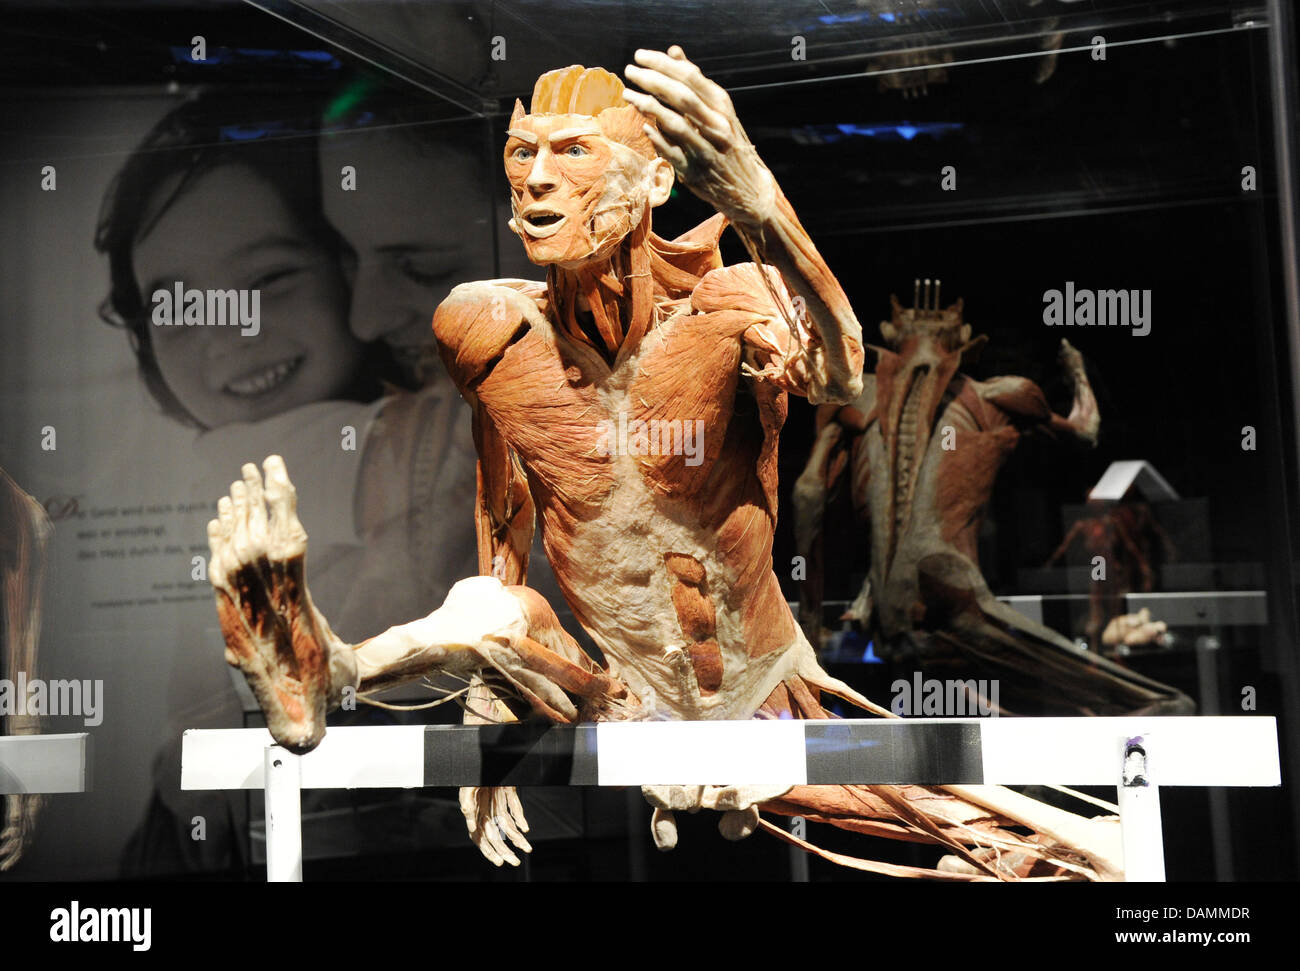 The exhibit 'The Hurdler' is on display at Gunther von Hagen's 'Bodyworlds and the Story of the Hearts' exhibition at the Postbahnhof venue in Berlin, Germany, 22 June 2011. Photo: Jens Kalaene Stock Photo